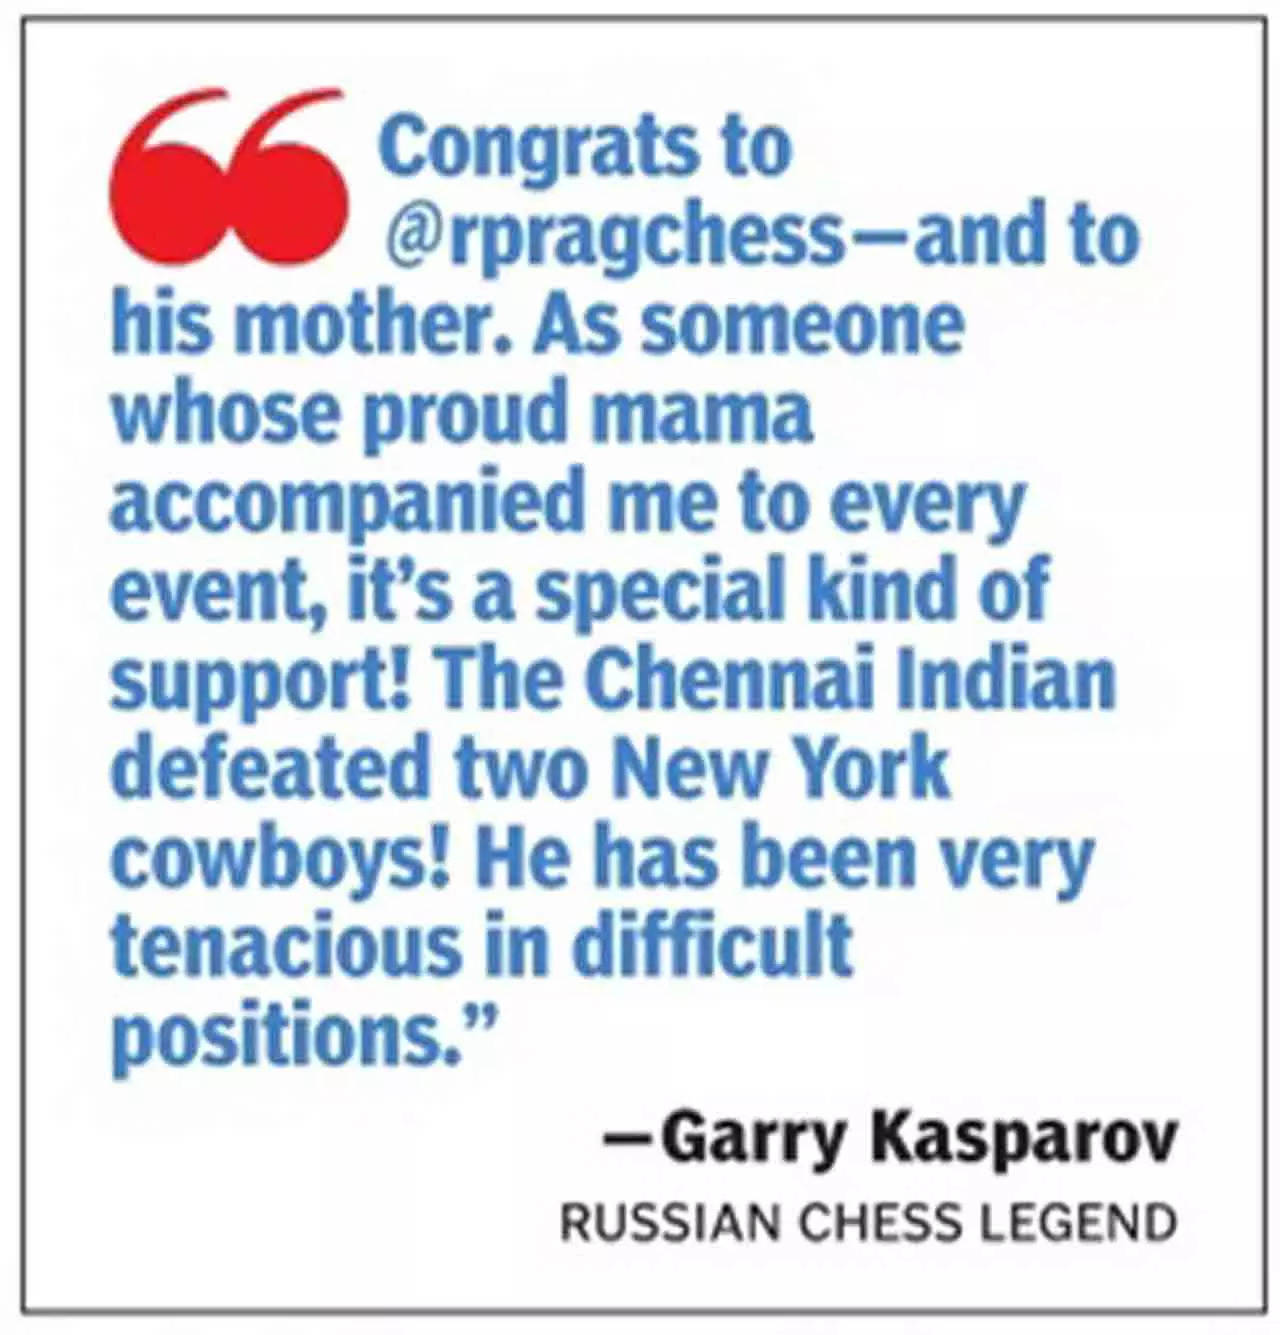 Chess World Cup  Russian grandmaster Kasparov congratulates  Praggnanandhaa; lauds mother for 'special kind of support' - The Hindu